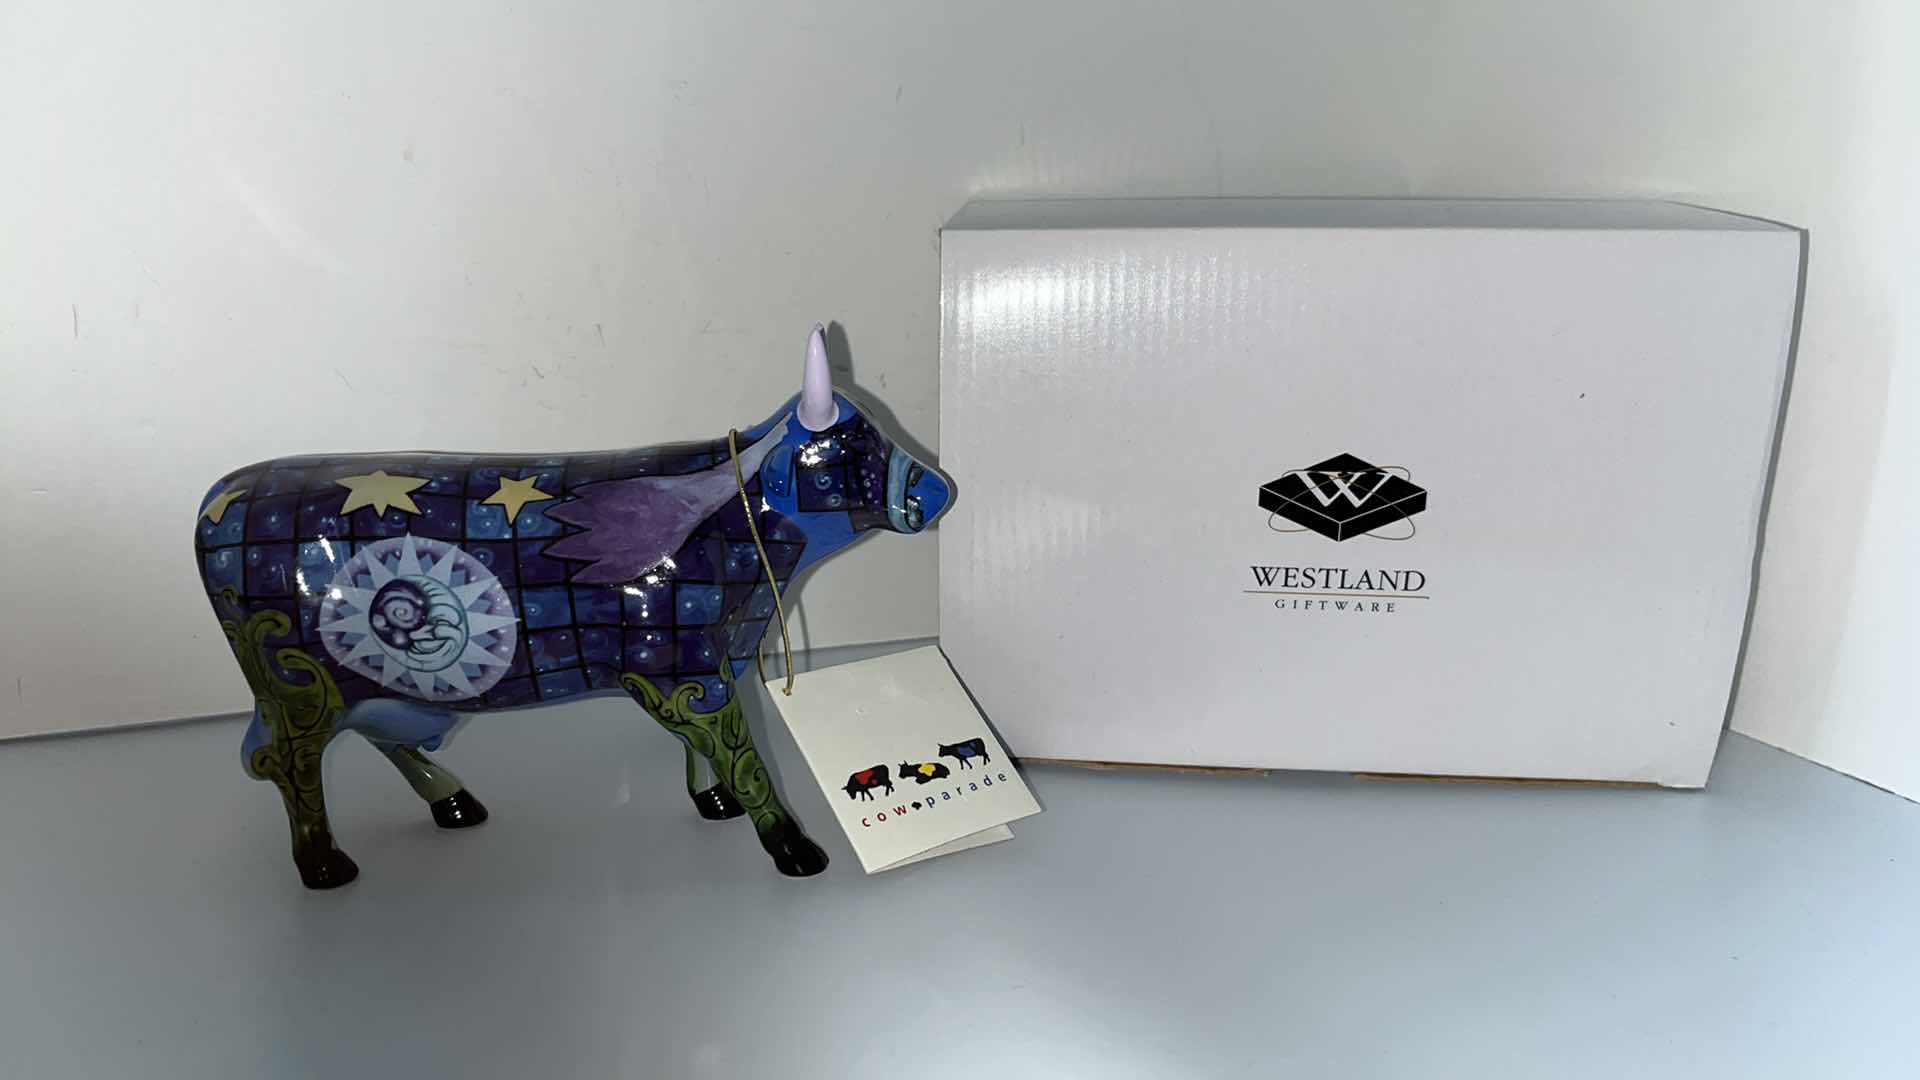 Photo 1 of WESTLAND GIFTWARE COW PARADE INFINITY COW FIGURINE 2001 (9191)